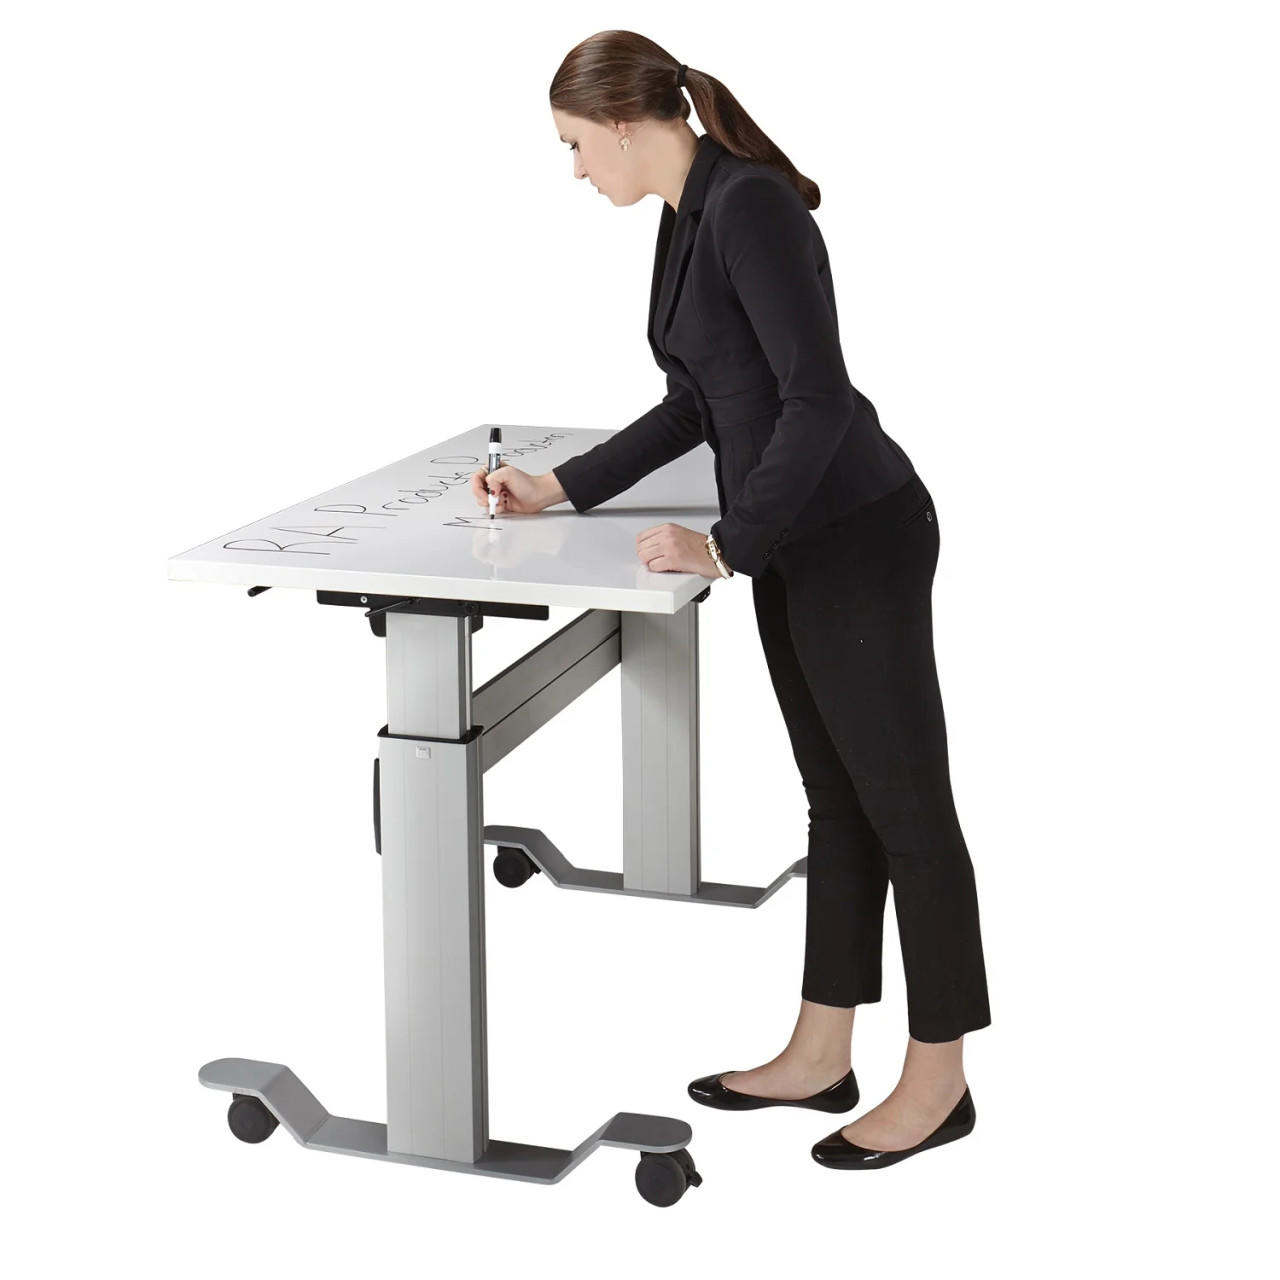 Right Angle Products Right Angle Eficiente LT 72"W x 30"D Flip Top Height Adjustable Mobile Table with Marker Board Top 